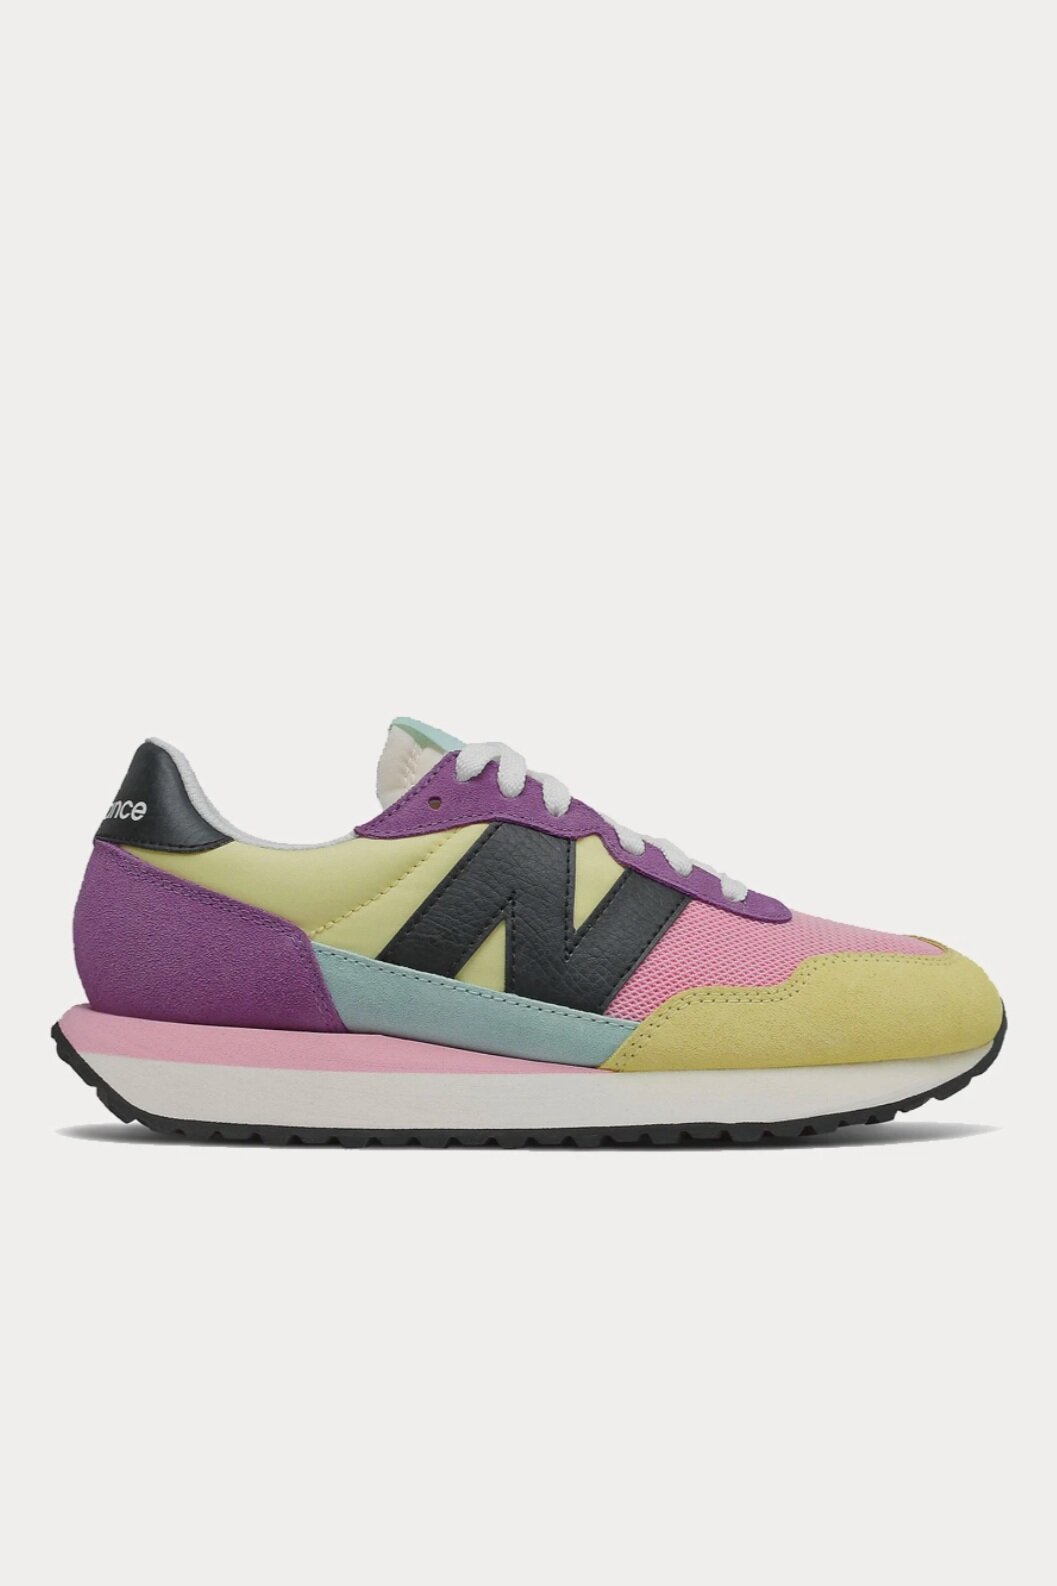 New Balance 237 Sneakers ($85)